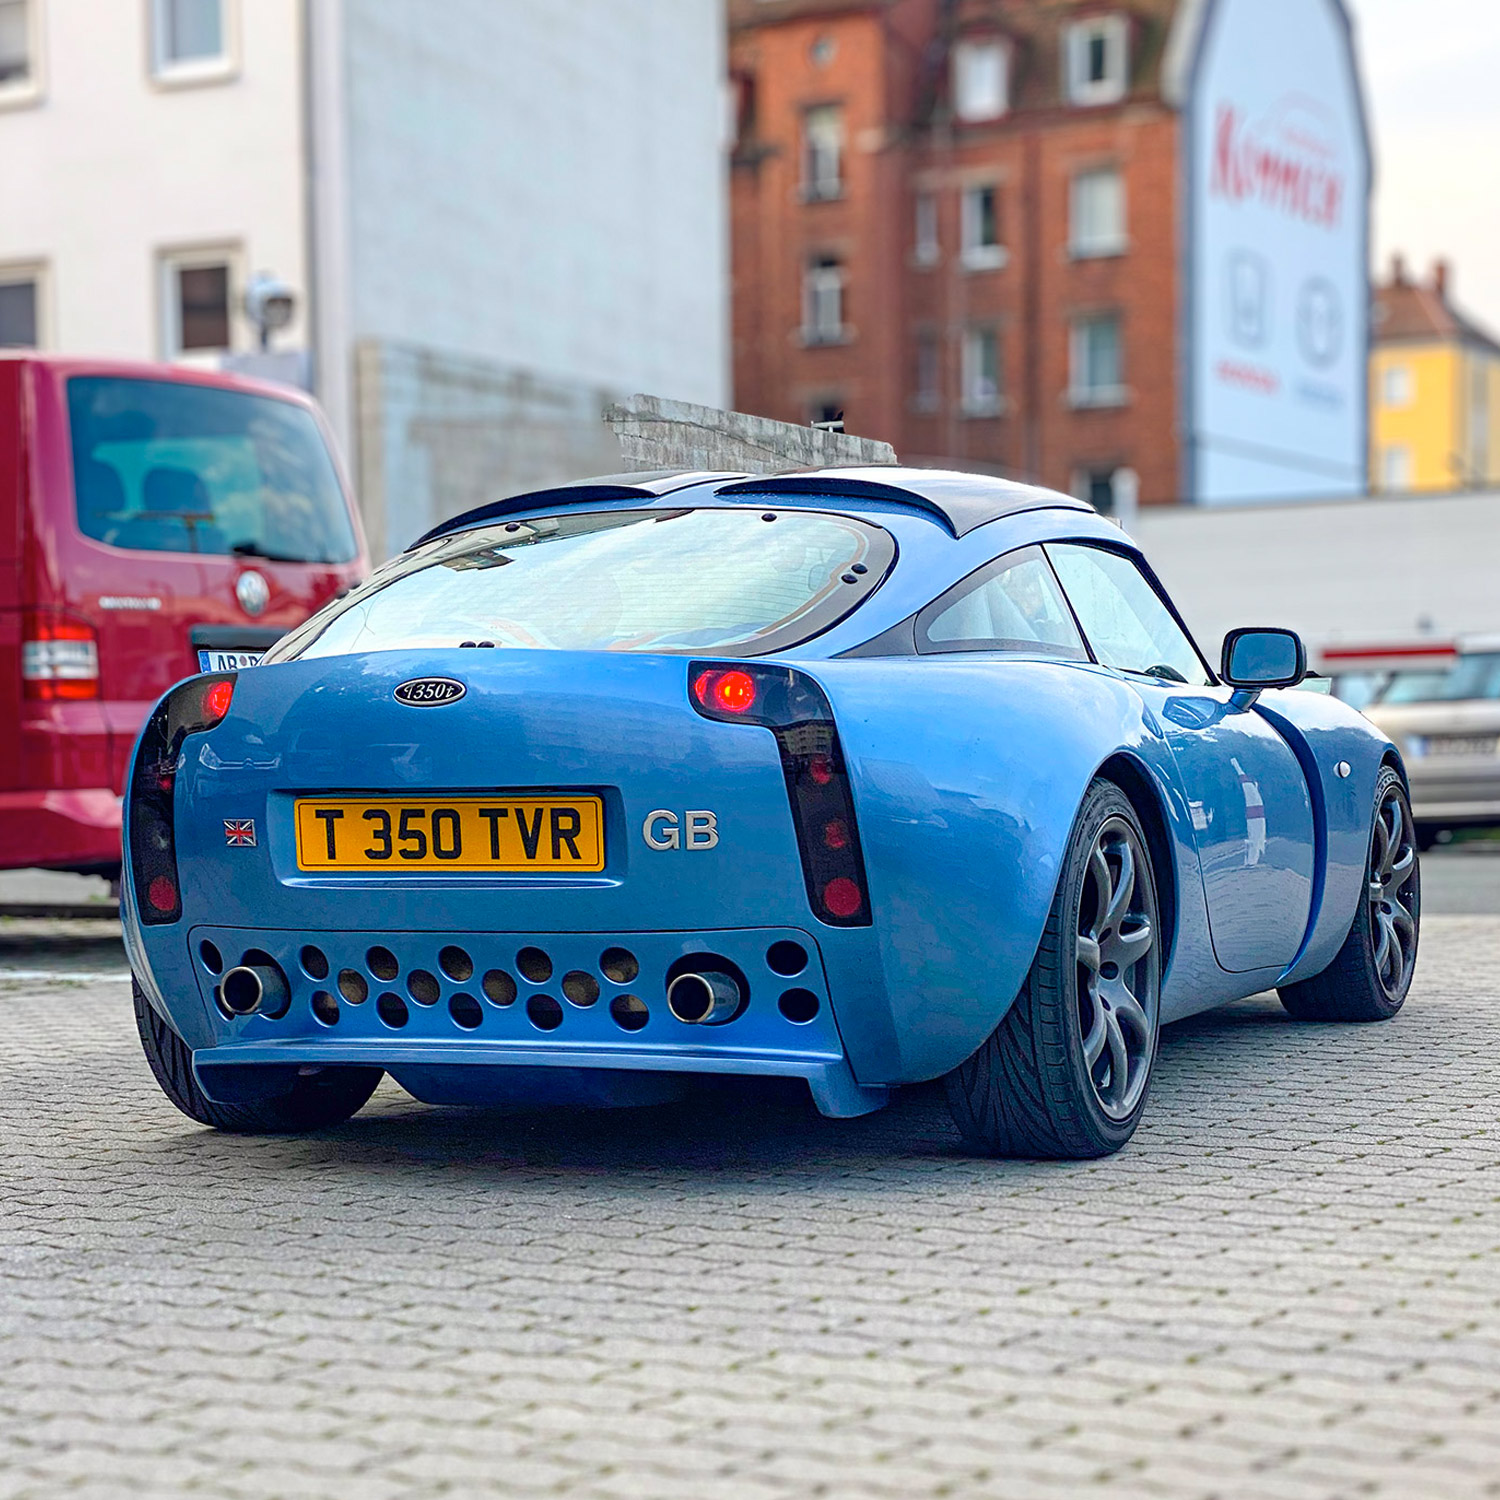 The TVR T350